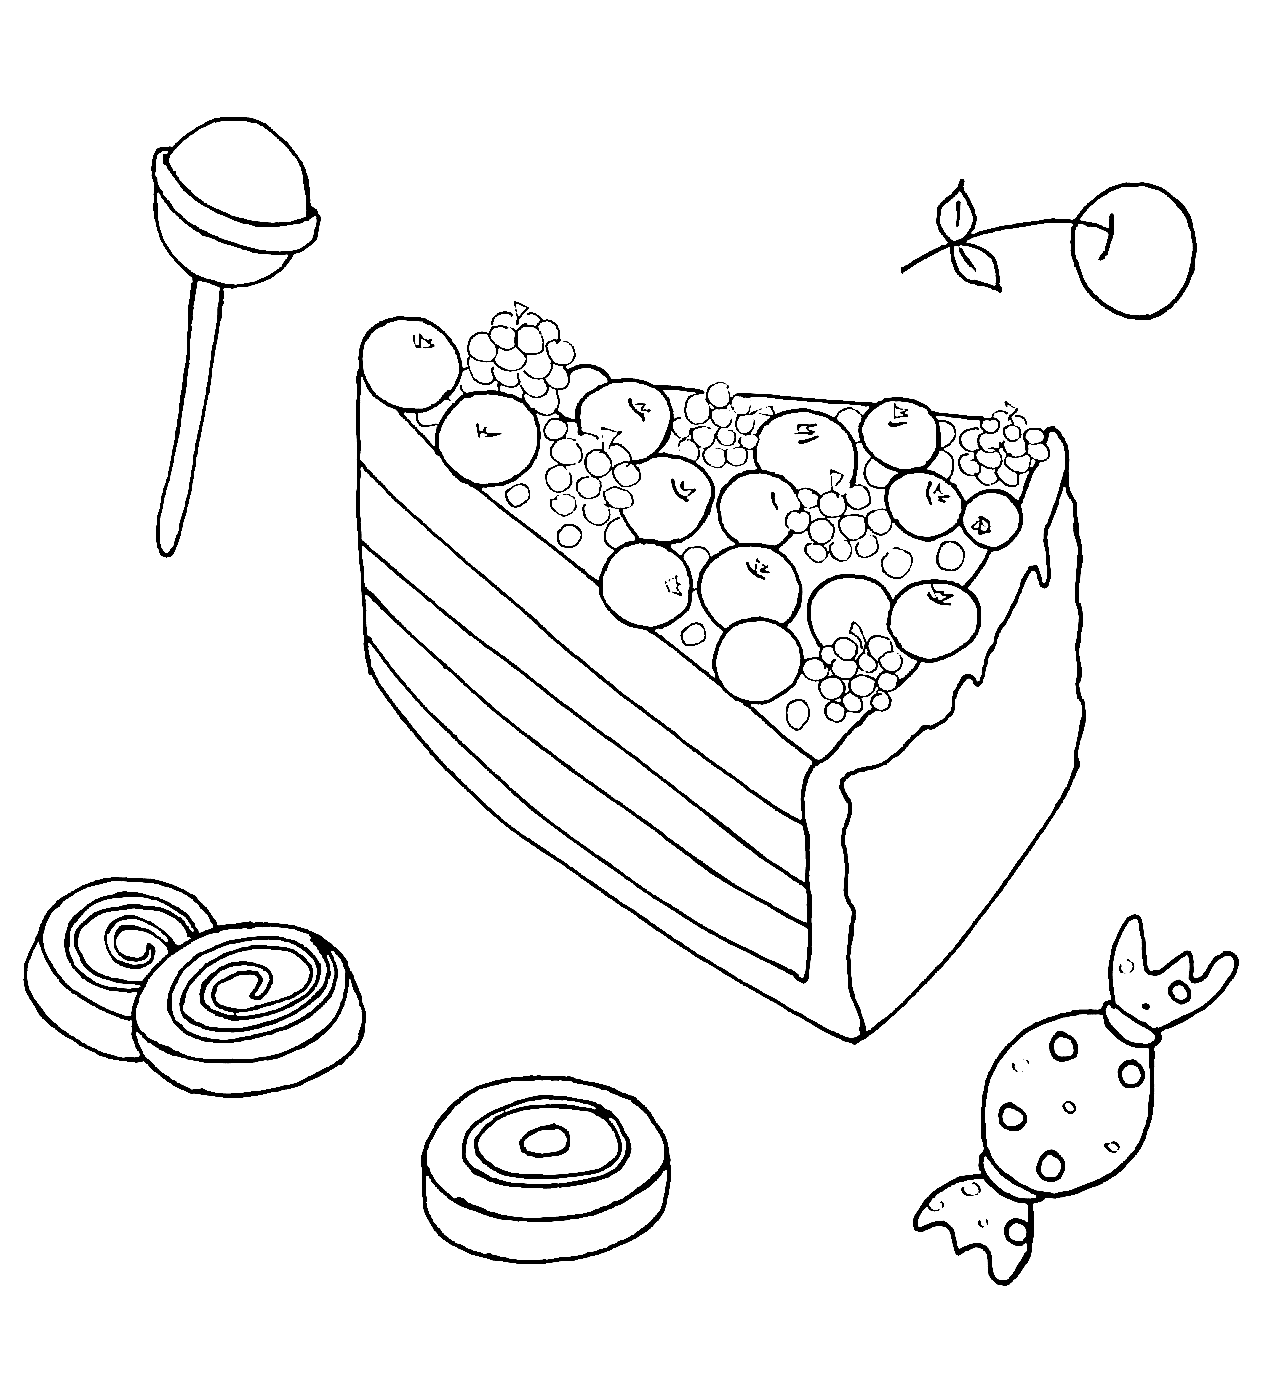 Bilberry Pie Coloring Page